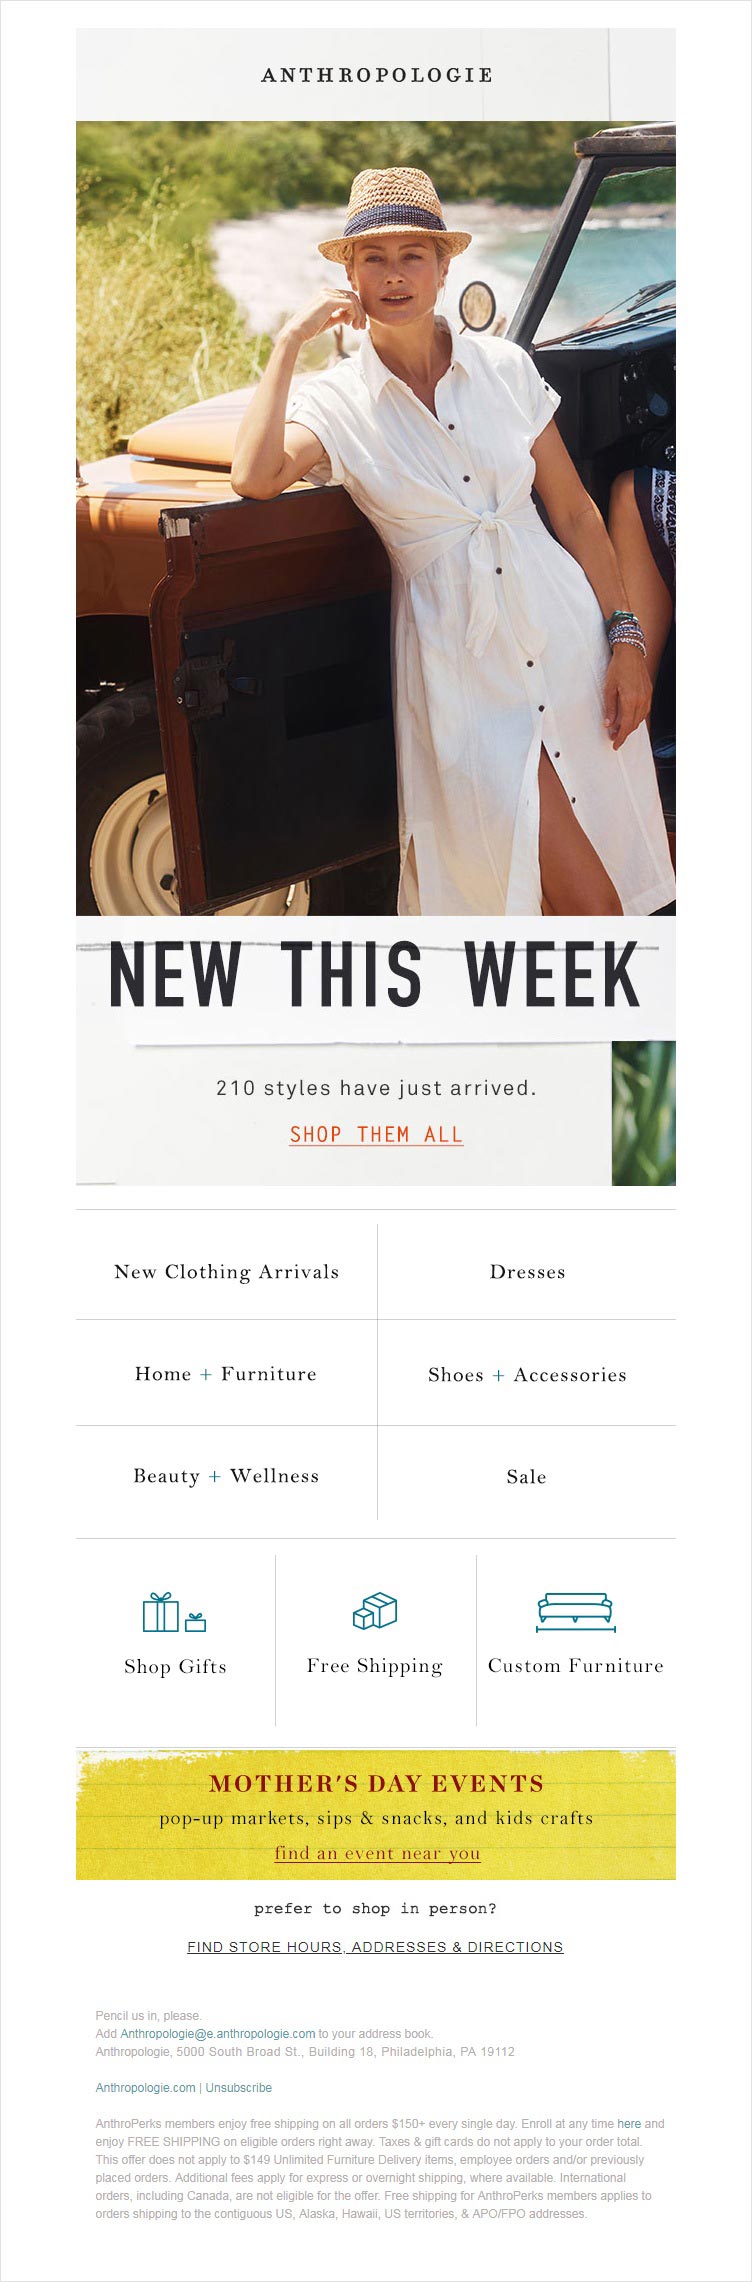 Anthropologie-images-in-HTML-email